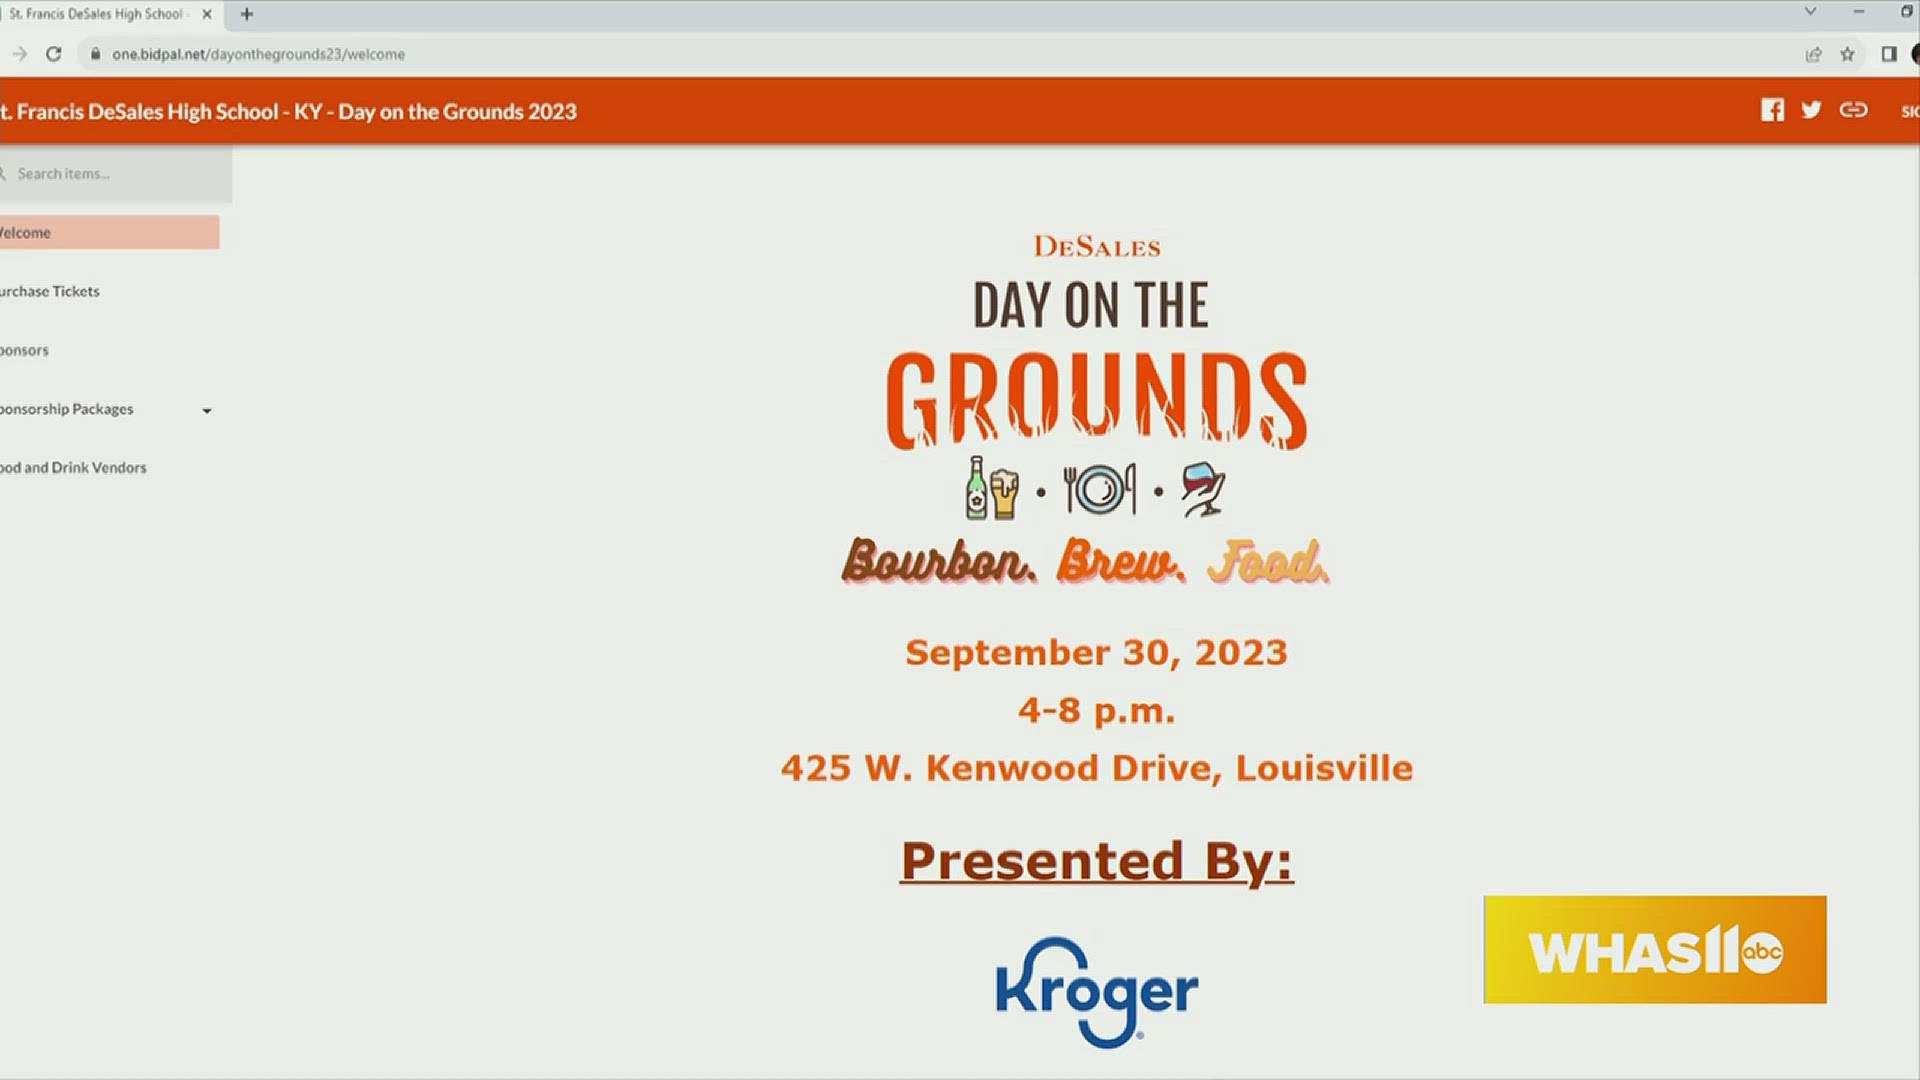 DeSales High School is gearing up for a day of Bourbon, Food and Fun. Day on the Grounds is coming up September 30th. Proceeds benefit the tuition fund.